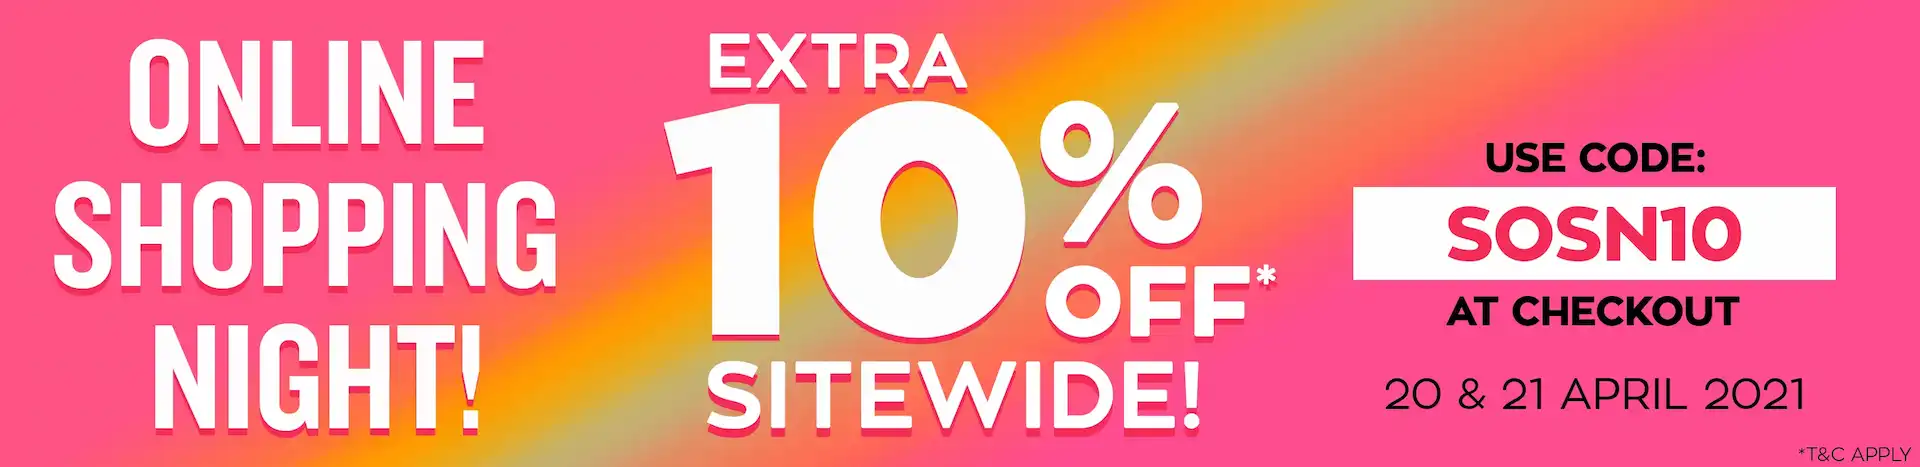 Save extra 10% OFF on everything